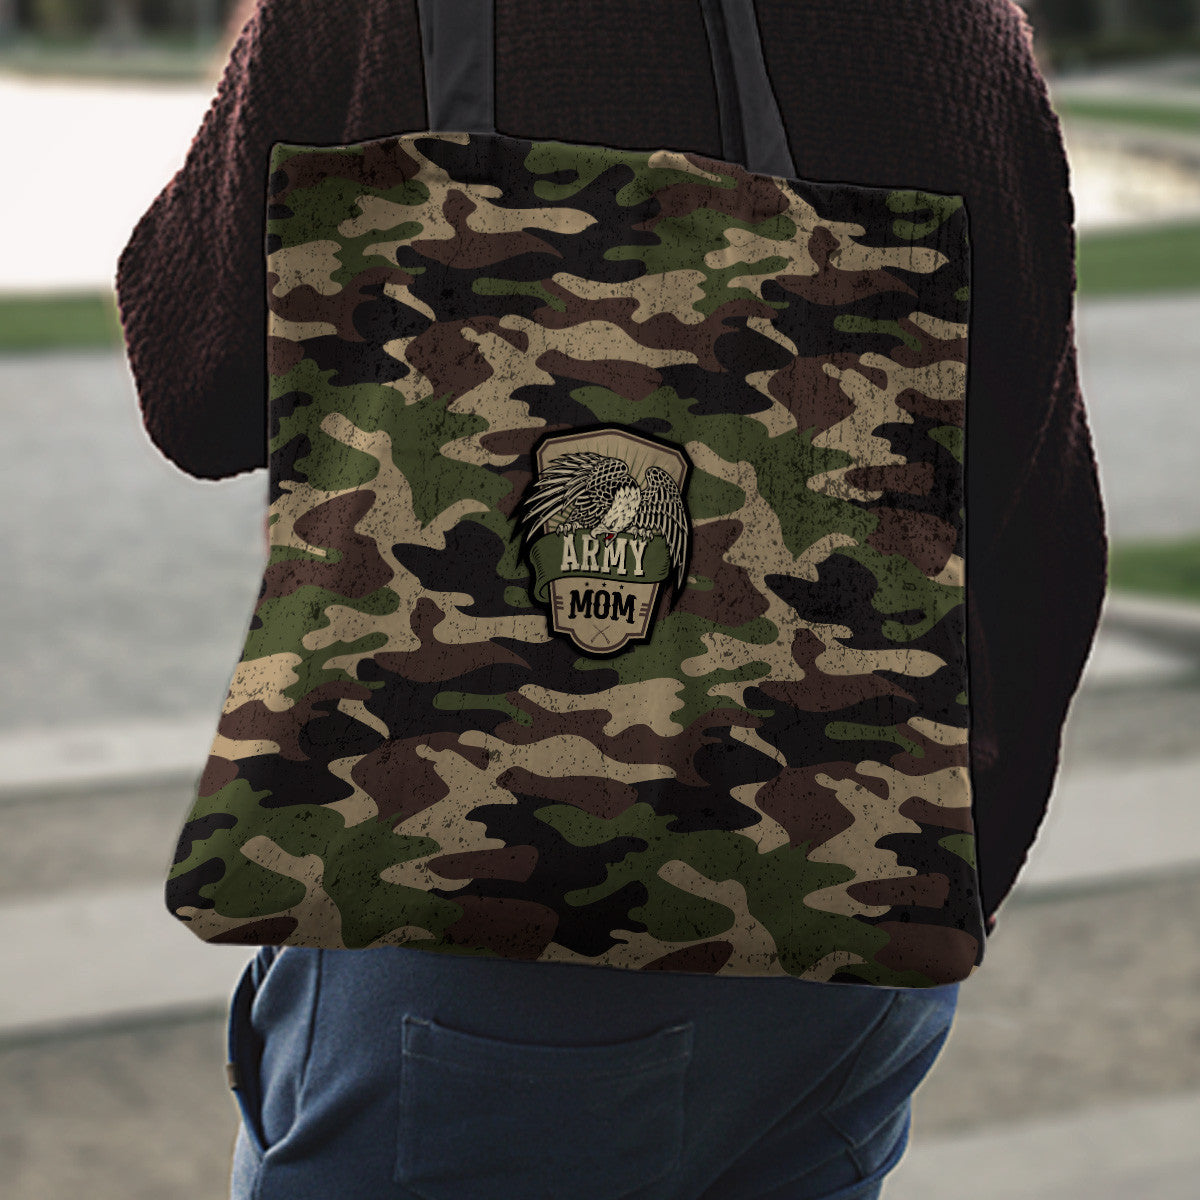 Army Mom Camouflage Tote Bag